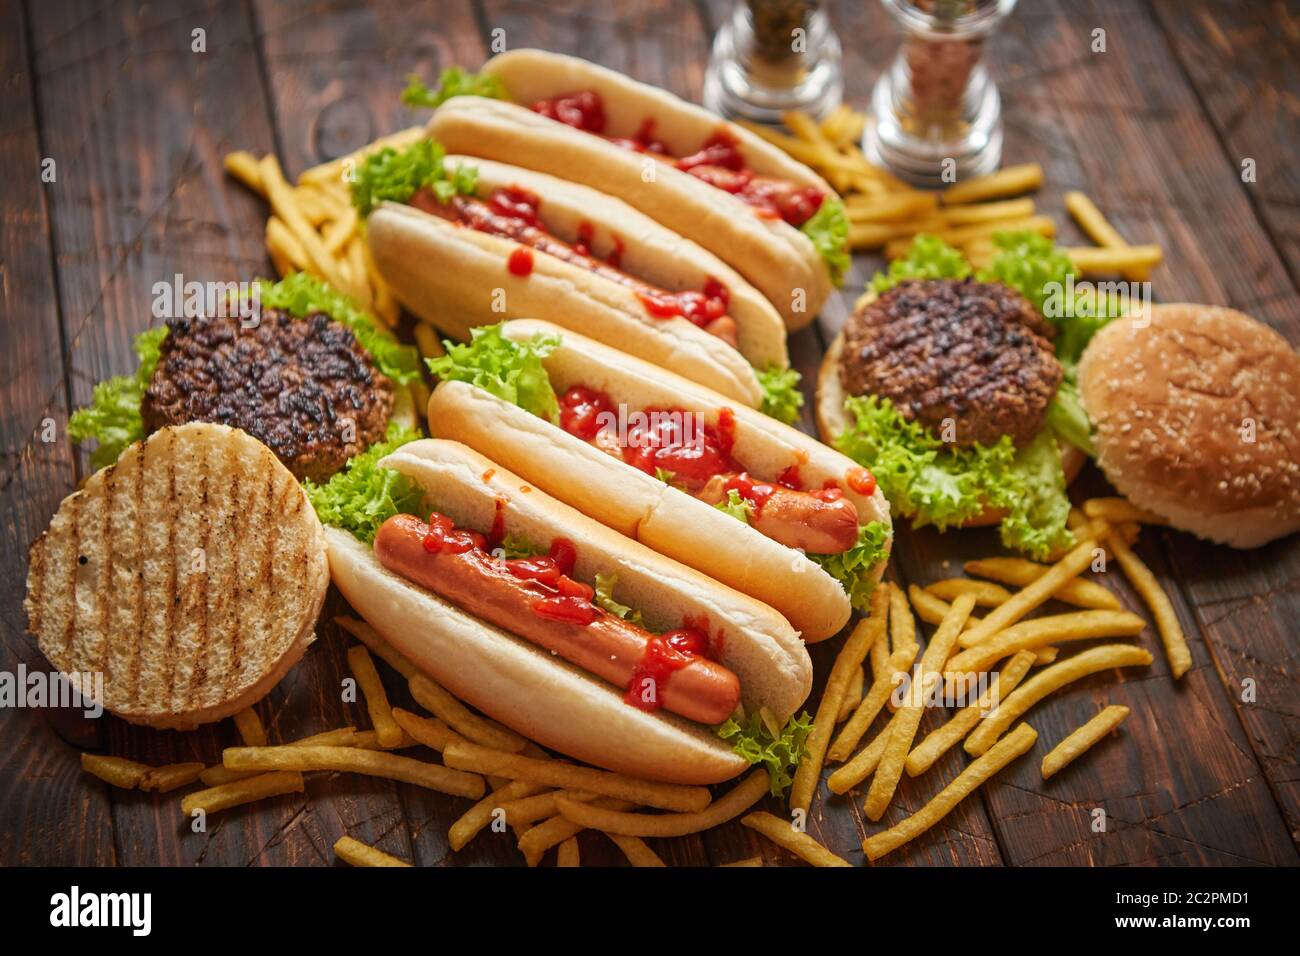 Fastfood assortment. Hamburgers and hot dogs placed on rusty wood table Stock Photo